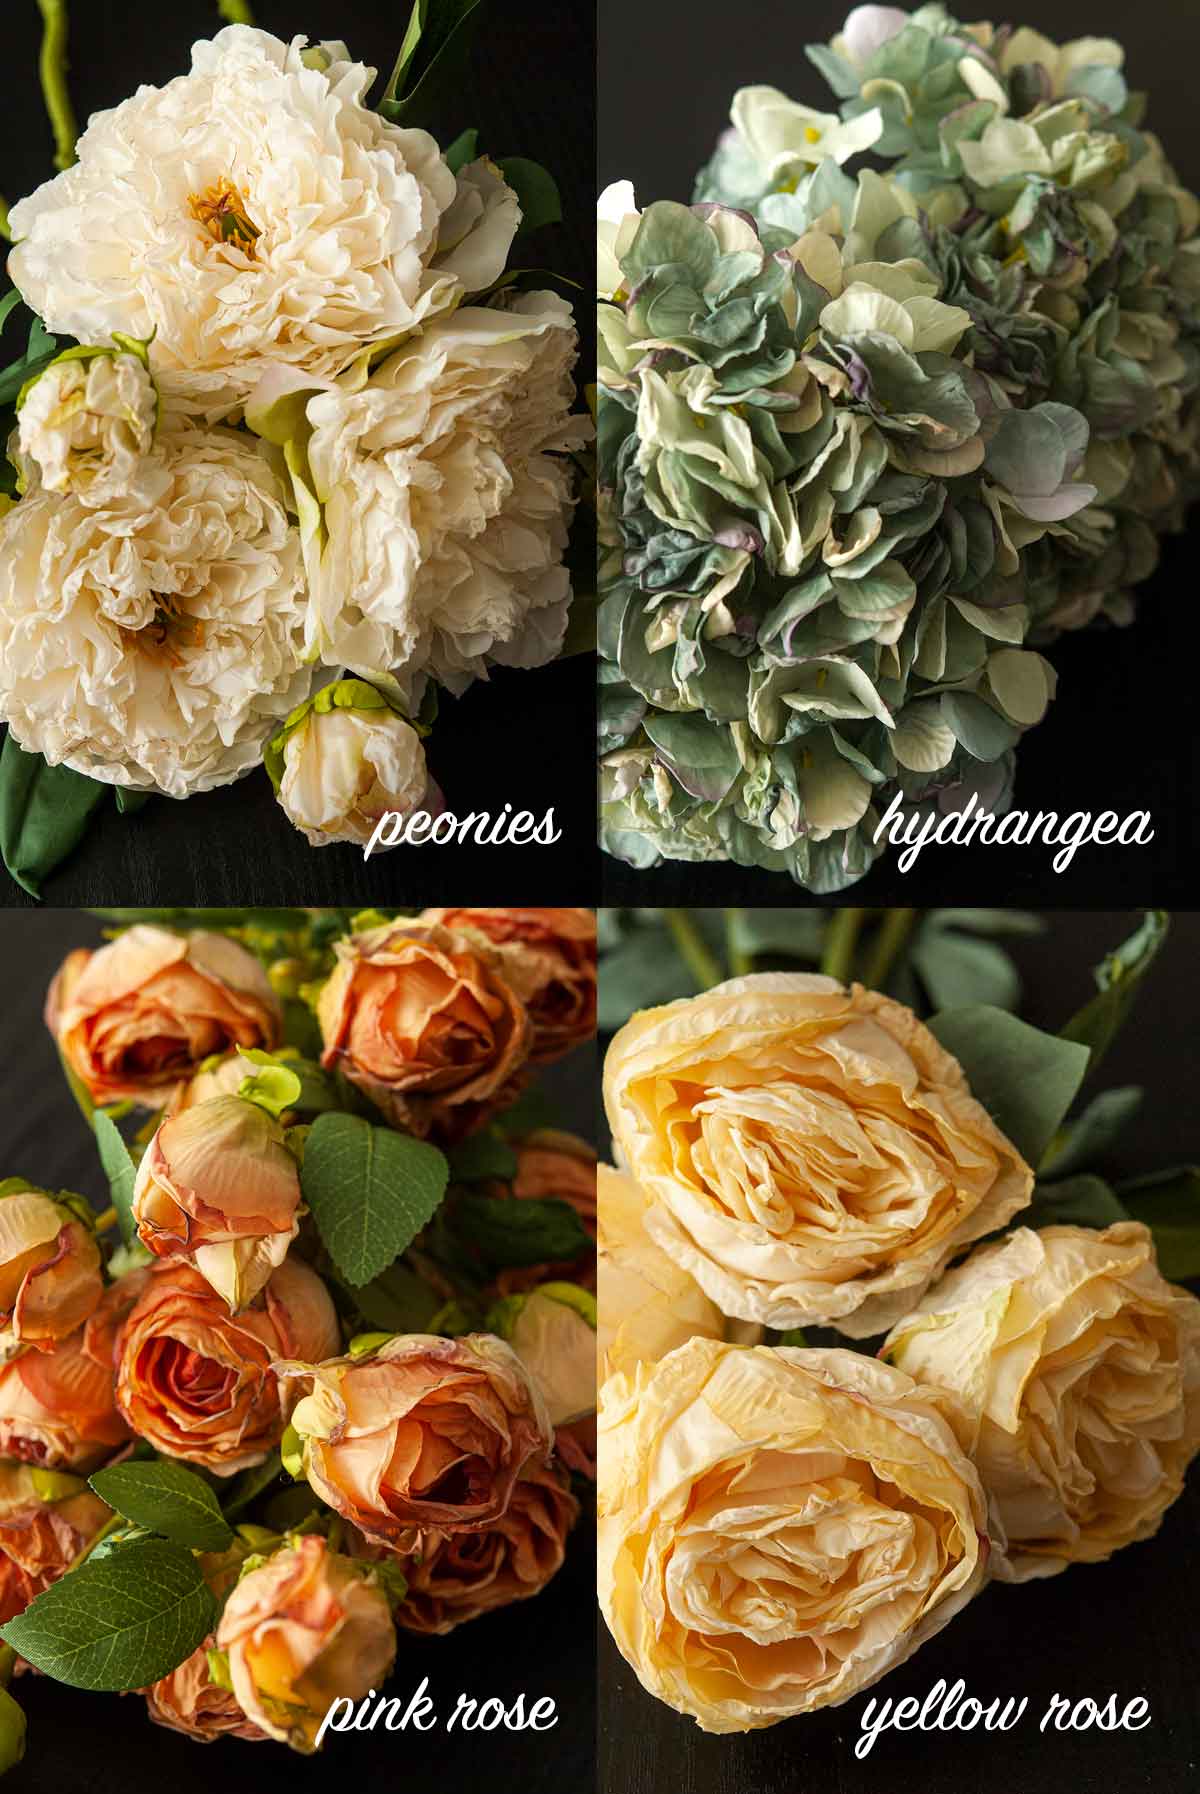 a collage of 4 images showing peonies, hydrangeas, pink roses and yellow roses.